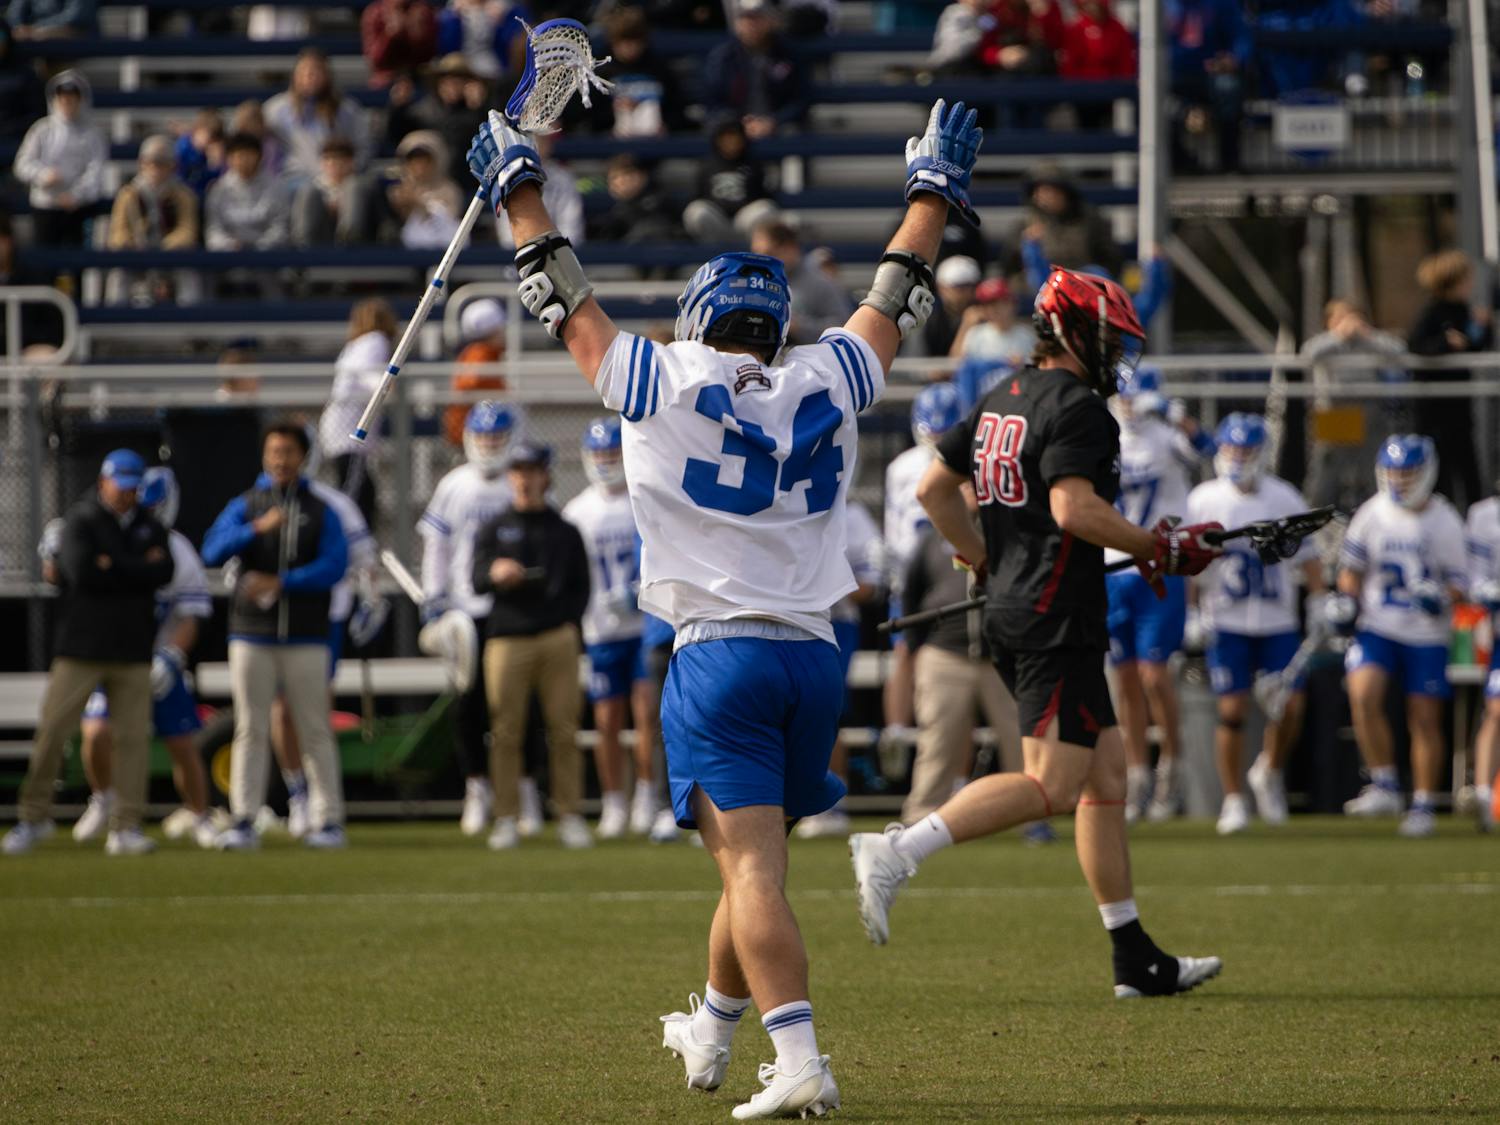 Brennan O'Neill became Duke's fifth all-time leading goalscorer with his five goals against Jacksonville.